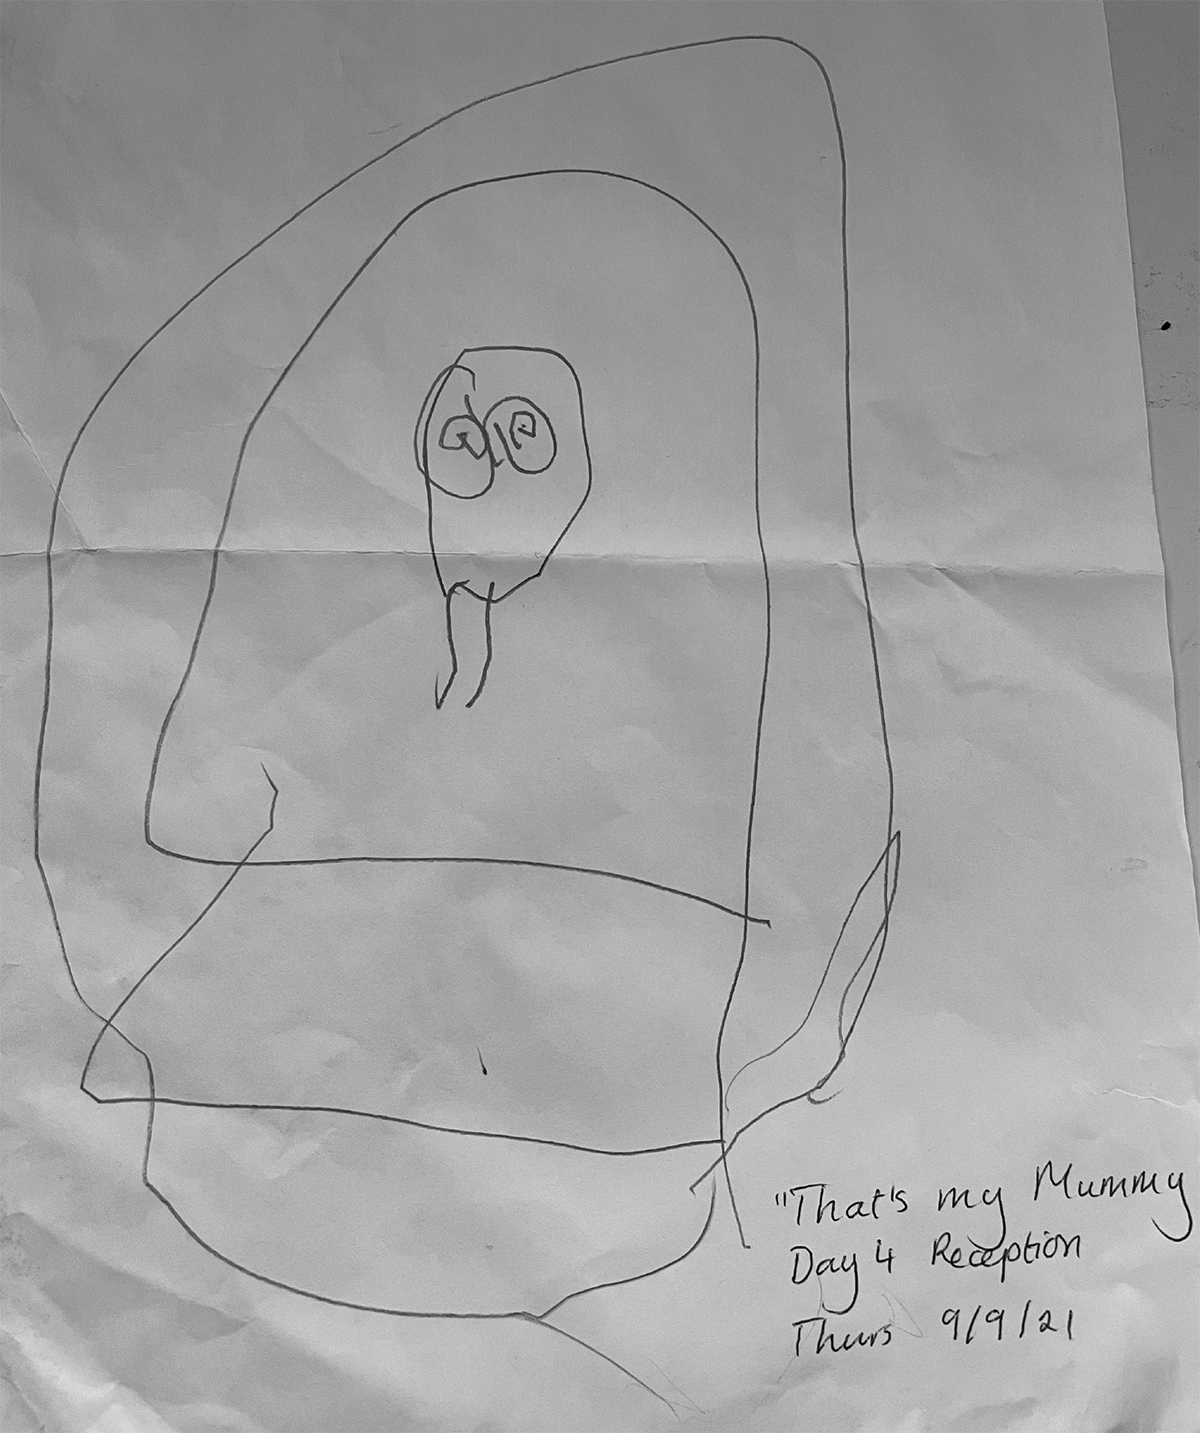 A child's line drawing on paper. There are words written by the side (we assume by an adult) "That's my Mummy. Day 4 Reception. Thurs 9/9/21)". The image has a rough circle on the middle which may be a head, and 2 circles inside that which may be eyes. These are surrounded by a rough oval shape.